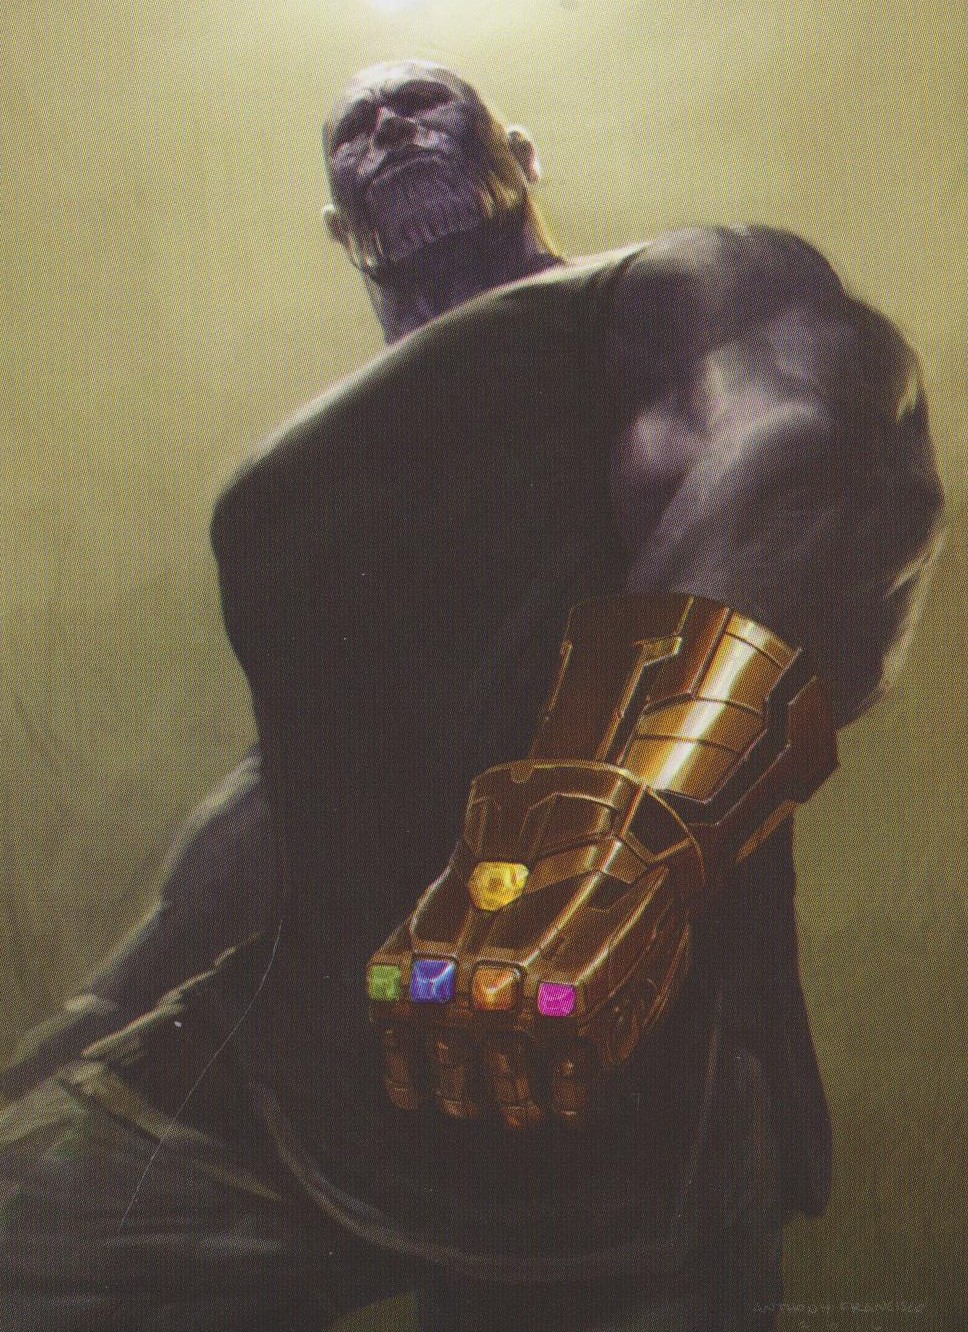 Avengers Infinity War Hi Res Concept Art Reveals Alternate Takes On Thanos Infinity Gauntlet